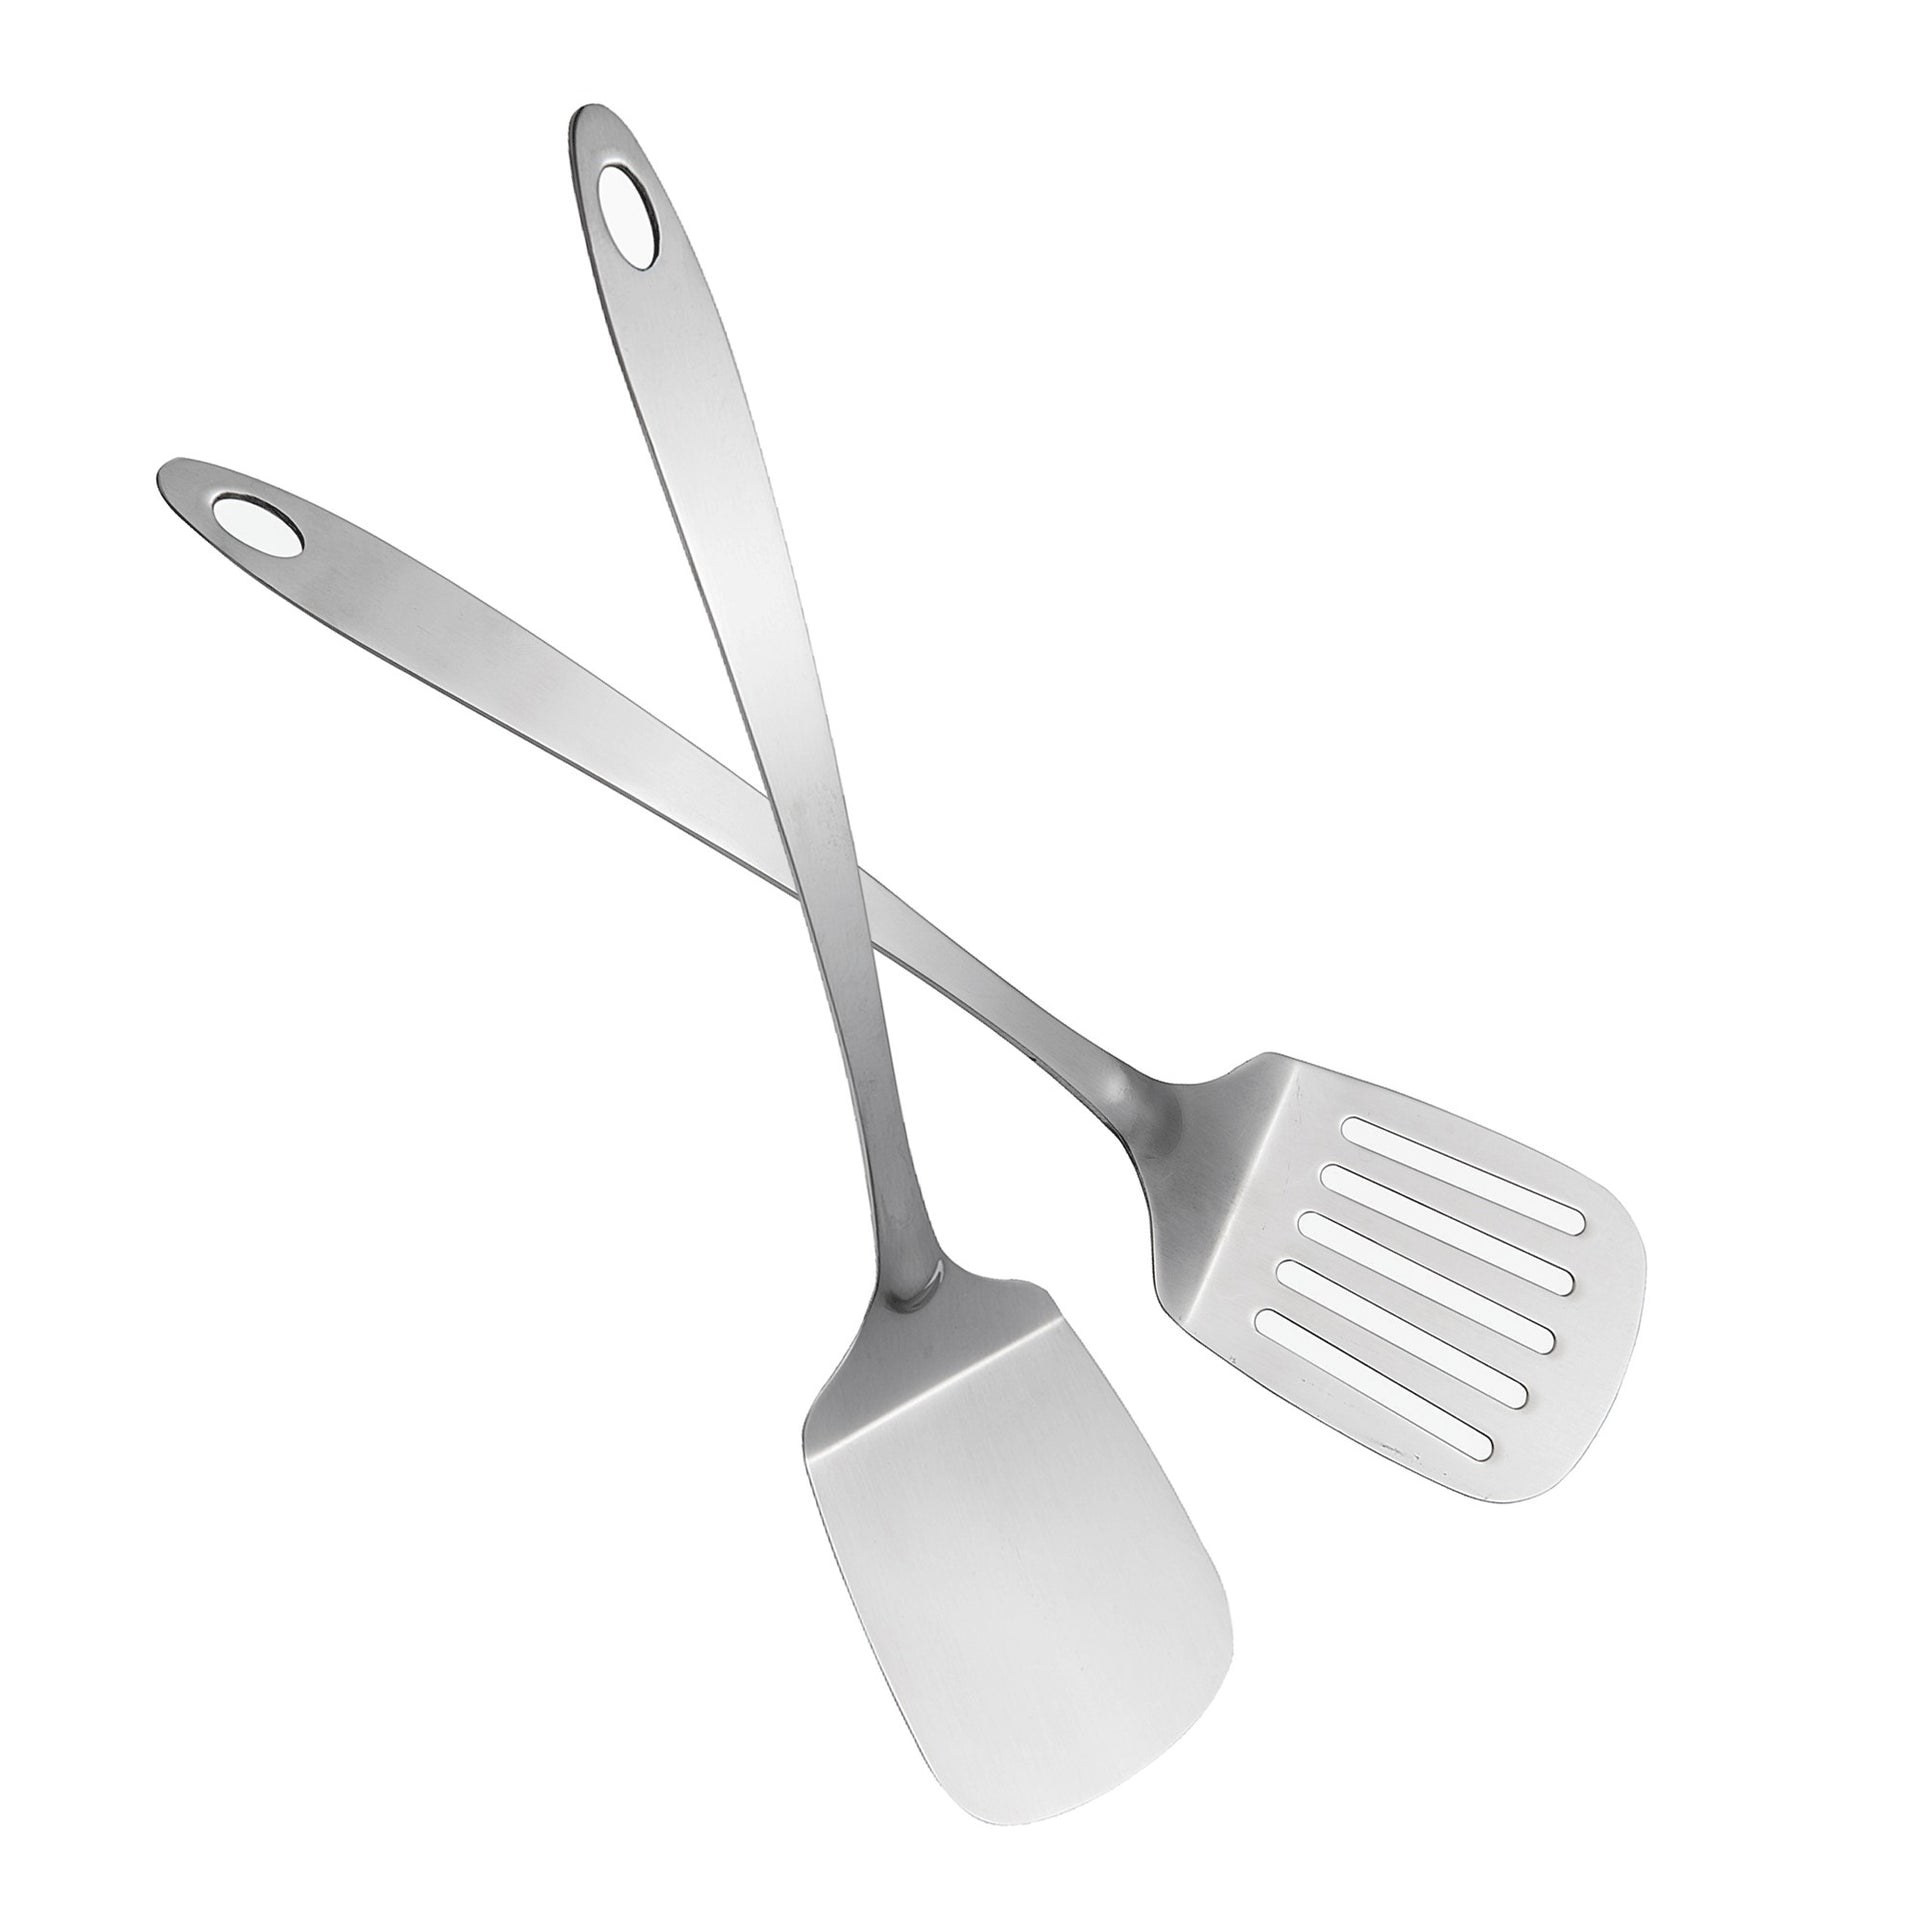 IMEEA Mini Serving Spatula Slotted Turner 9.5 Inch SUS304 Stainless Steel  Brownie Cooking Spatula with Short Handle